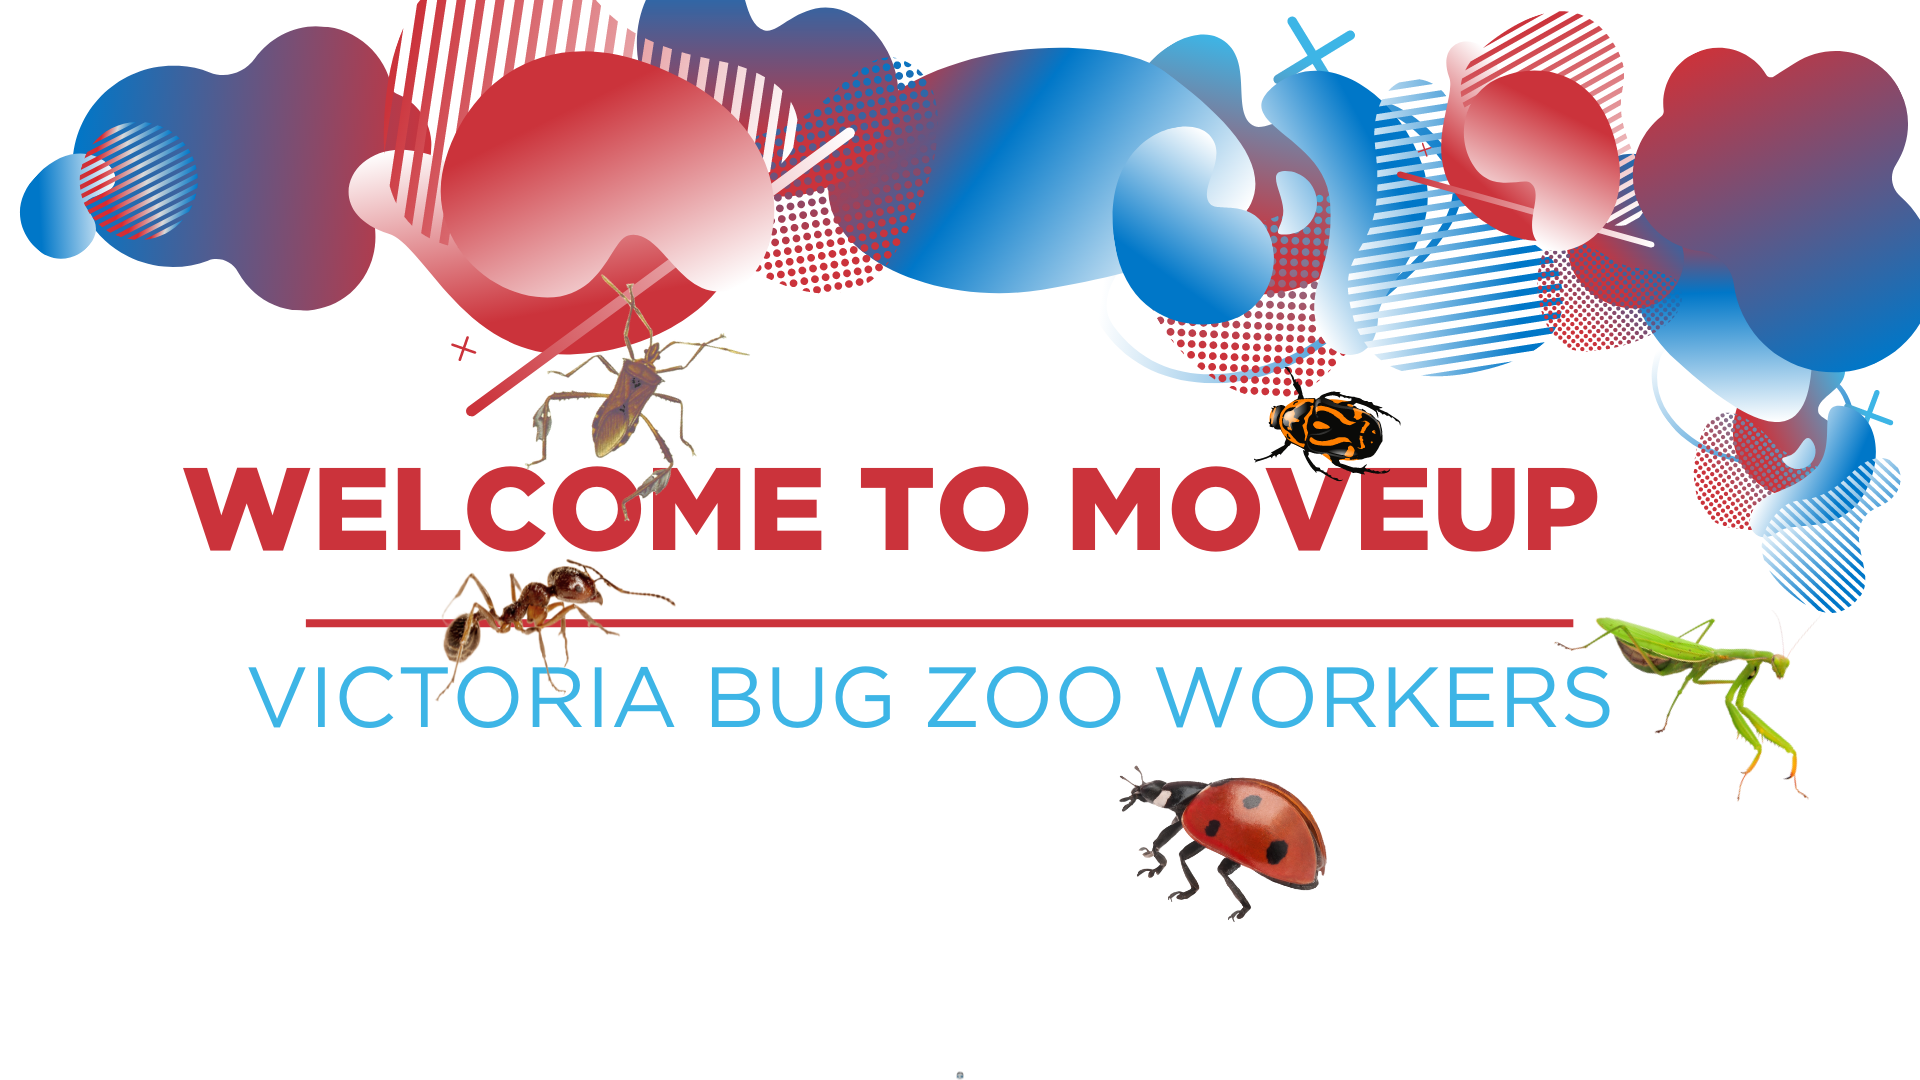 Welcome to MoveUP Victoria Bug Zoo workers